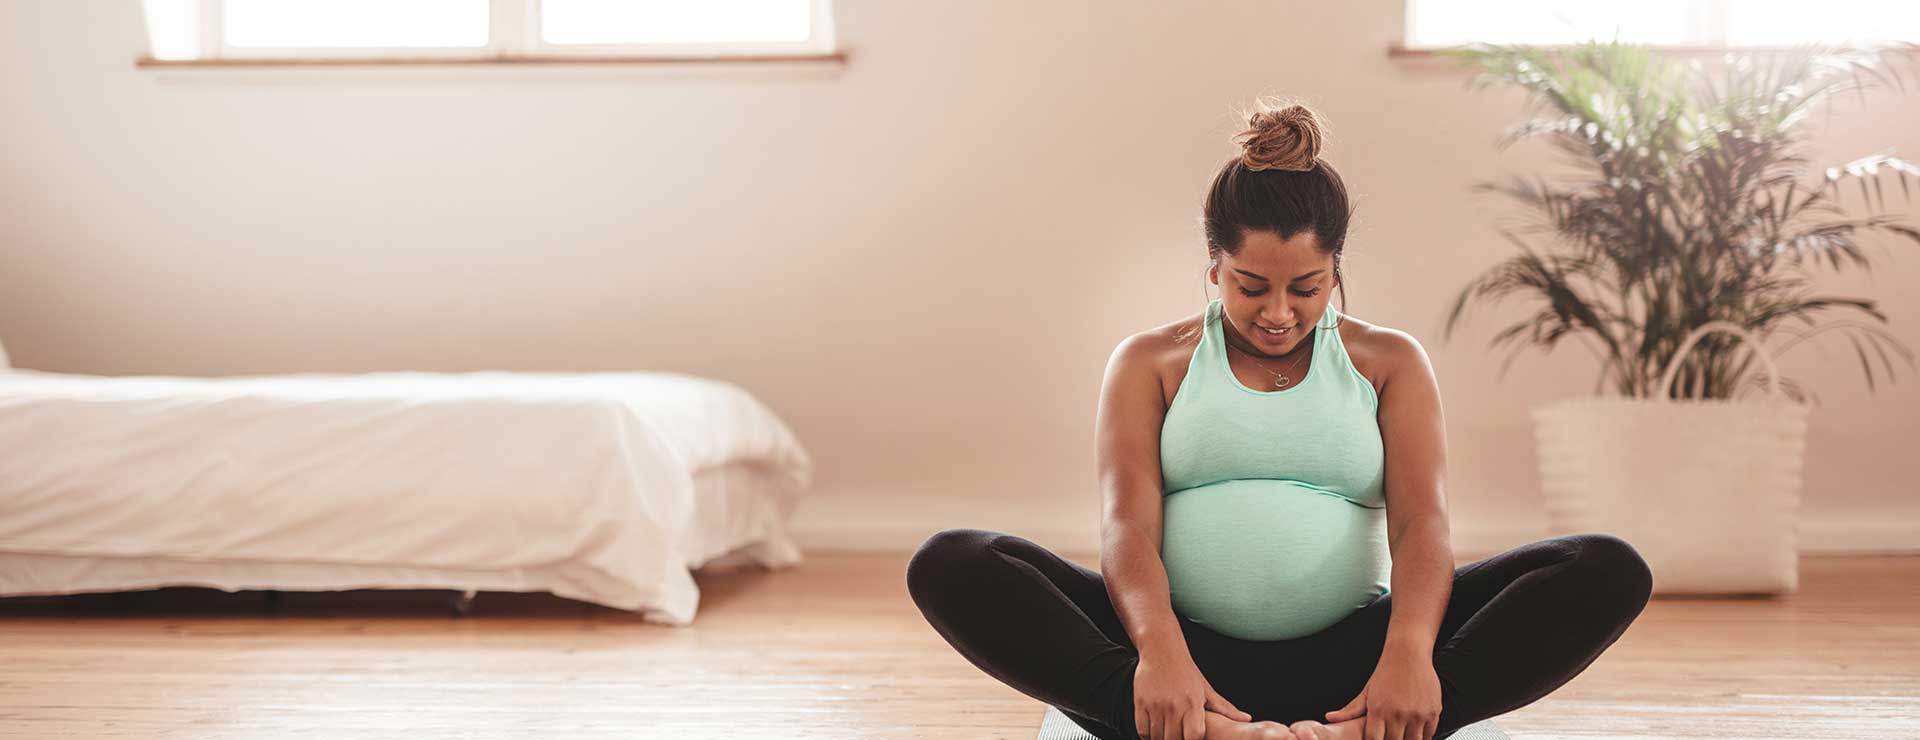 Pregnant Woman Sitting In A Lotus Pose Free Stock Photo and Image 164059610